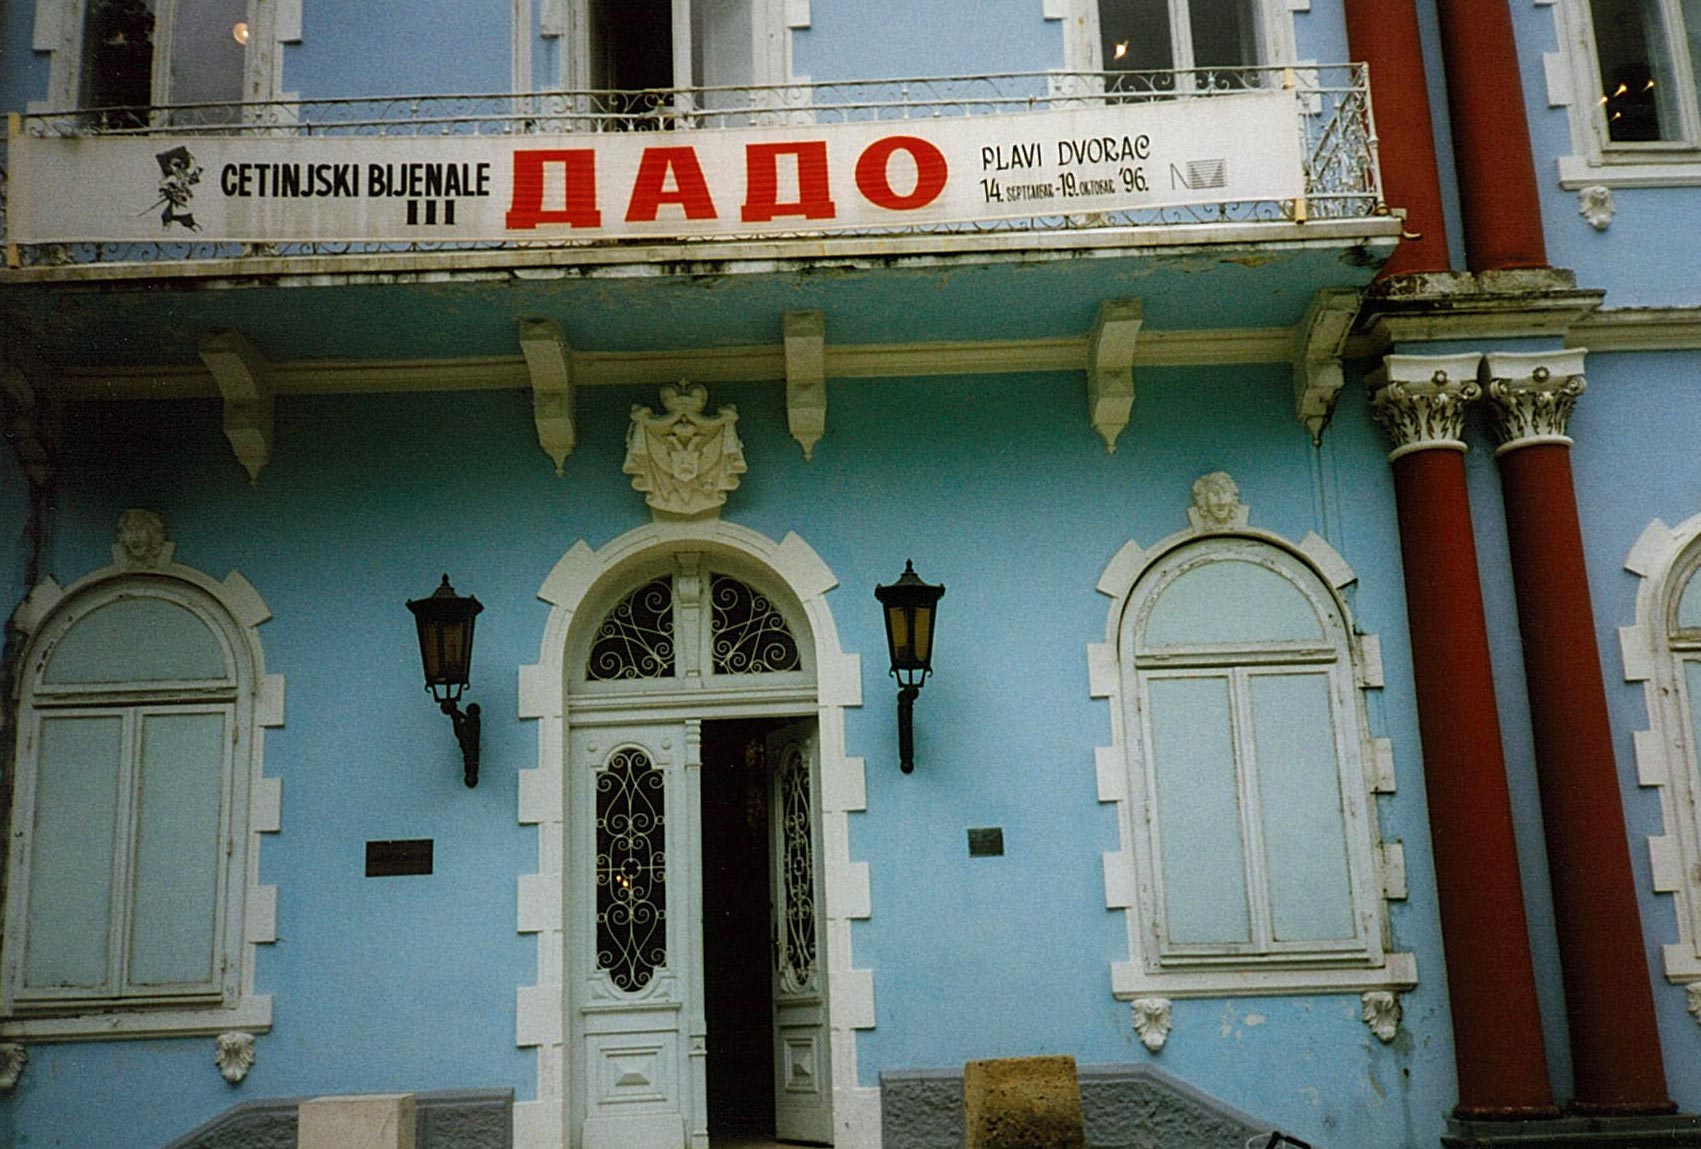 Dado’s exhibition at the Blue Palace in Cetinje in 1996